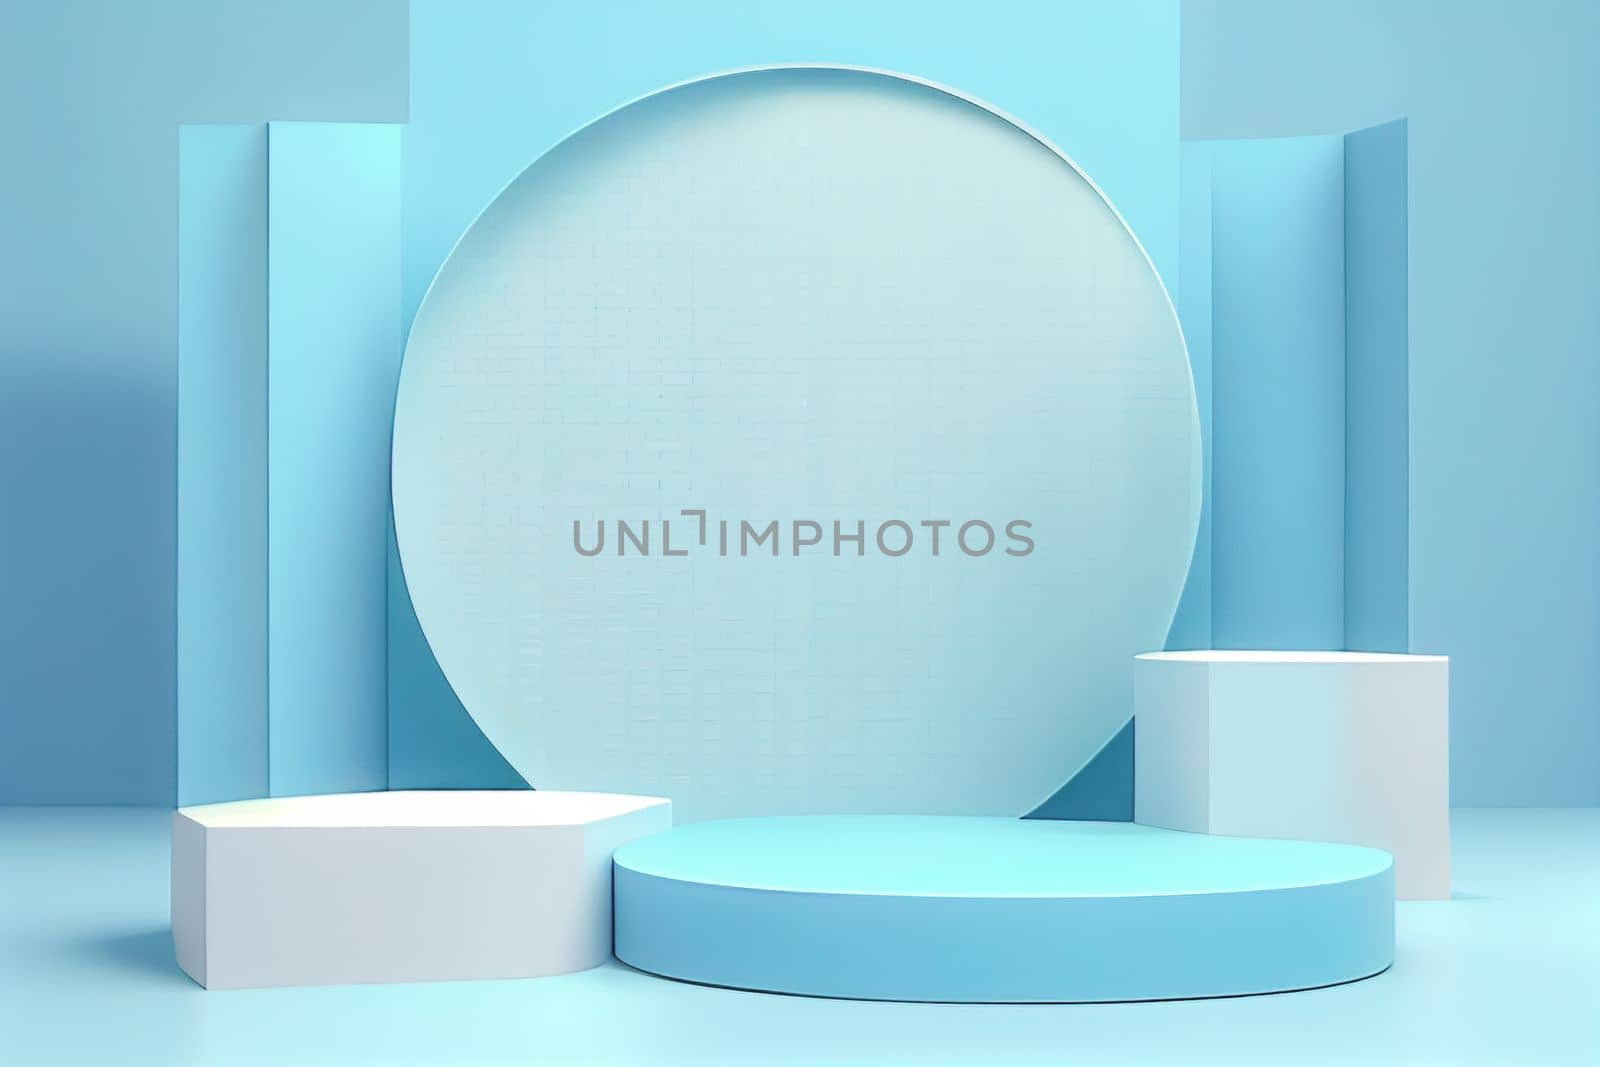 Pedestal podium with rounded corners in blue and white. Platform with geometric shapes. Scene of a minimalist wall in blue. Design of abstract in pastel colors. 